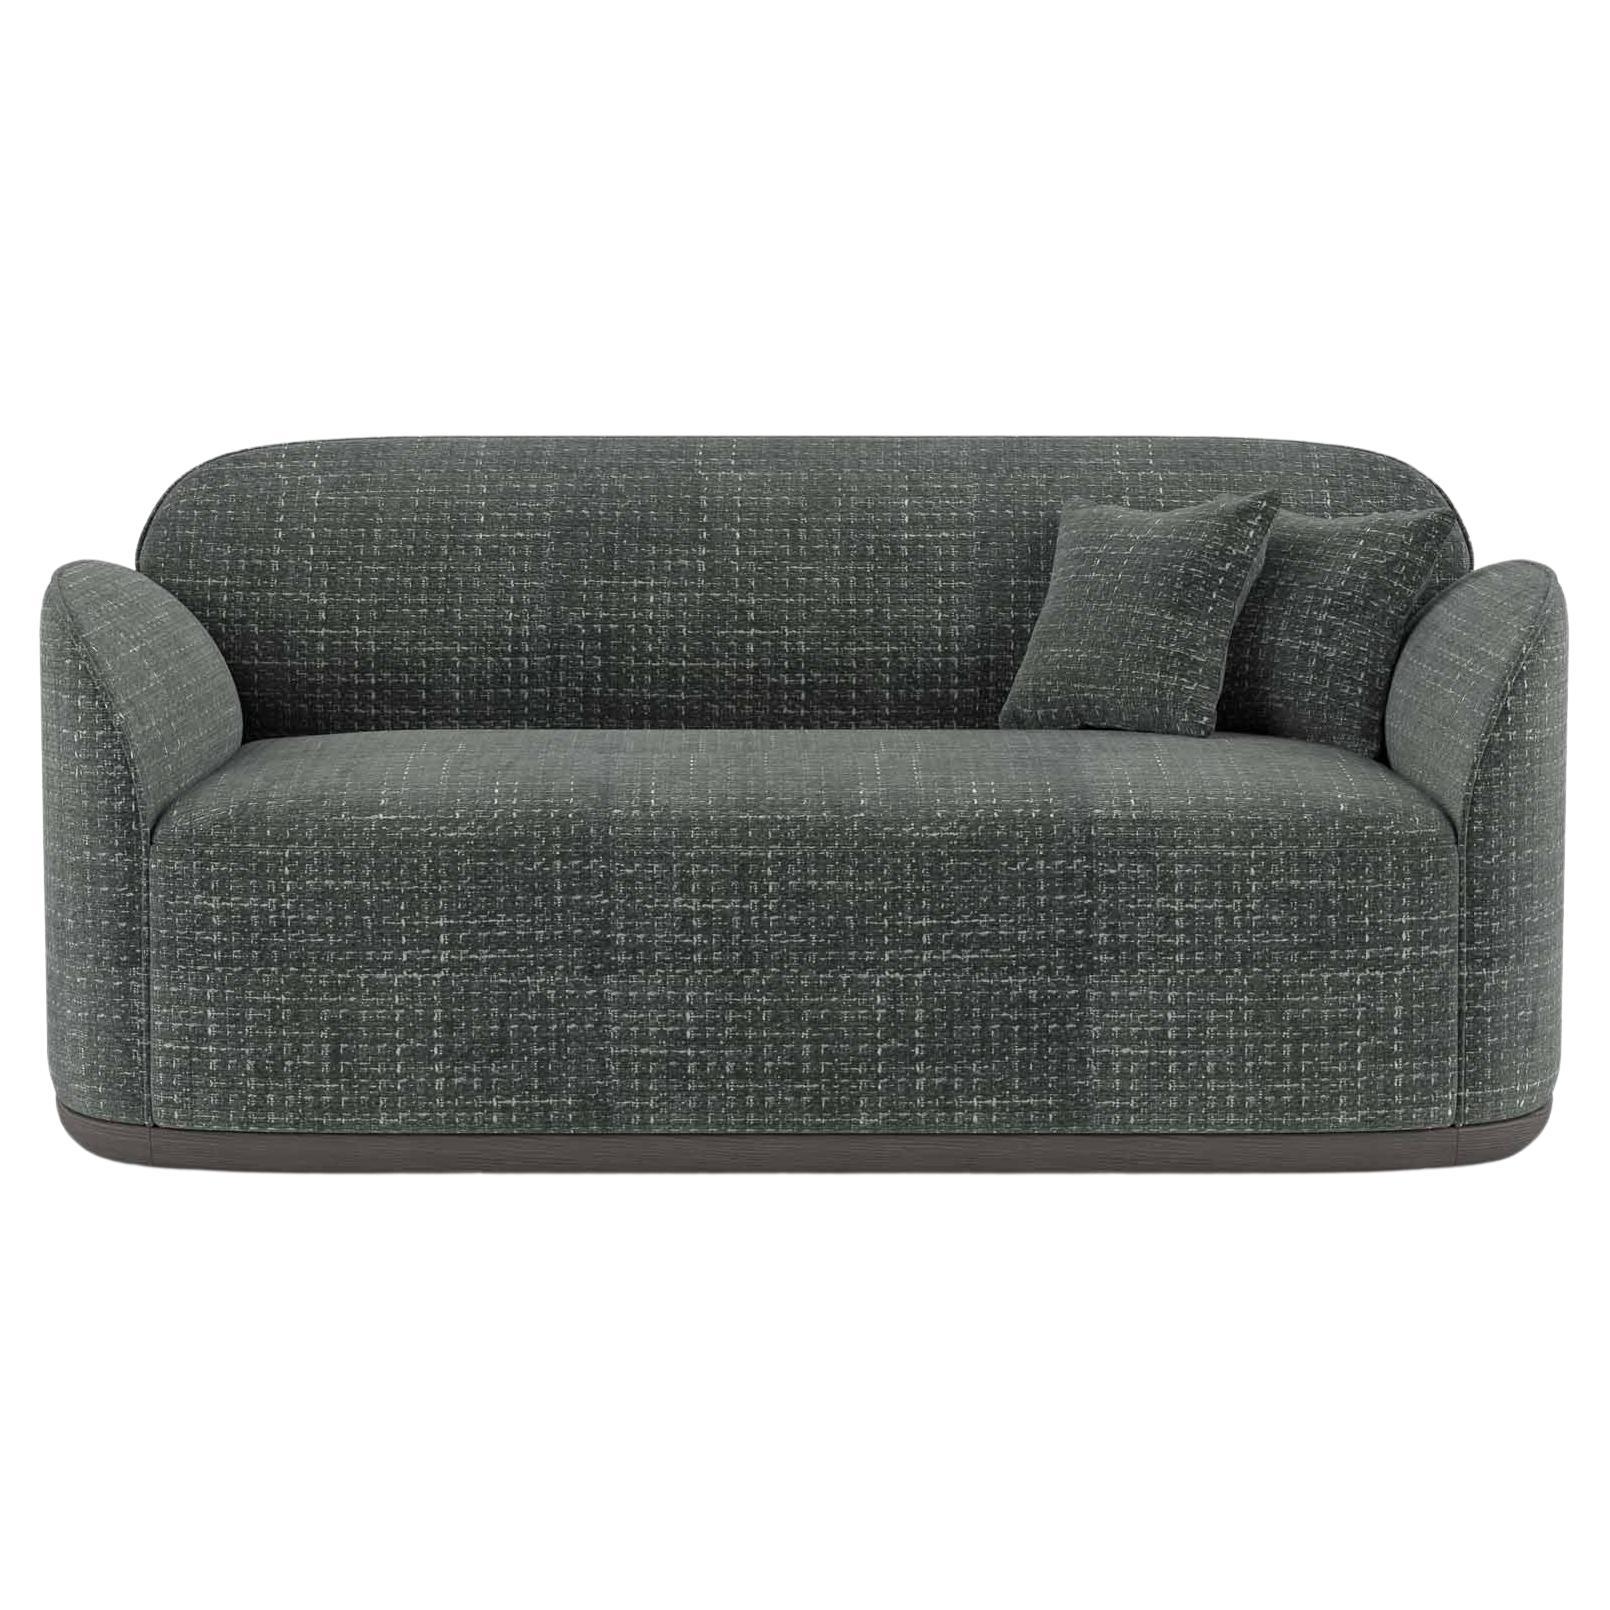 Unio Loveseat Upholstered with the Chivasso Yang Fabric by Poiat For Sale